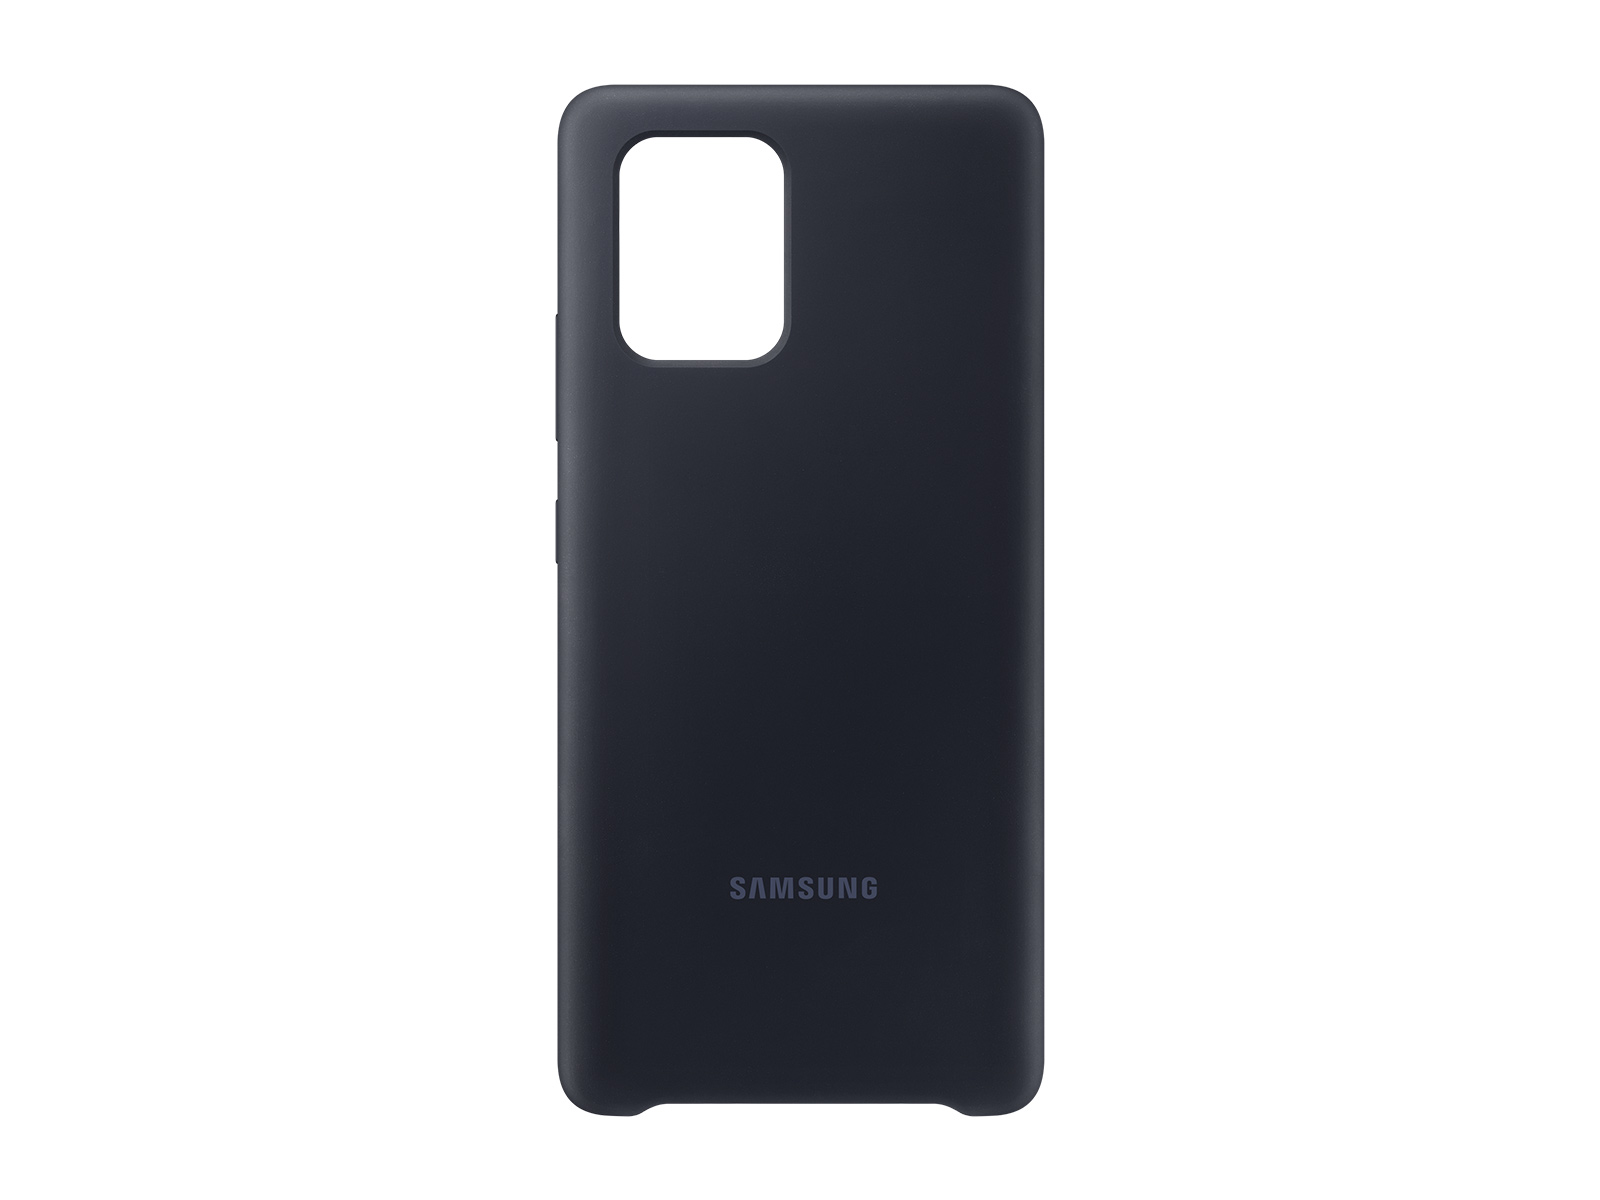 Thumbnail image of Galaxy S10 Lite Silicone Cover, Black